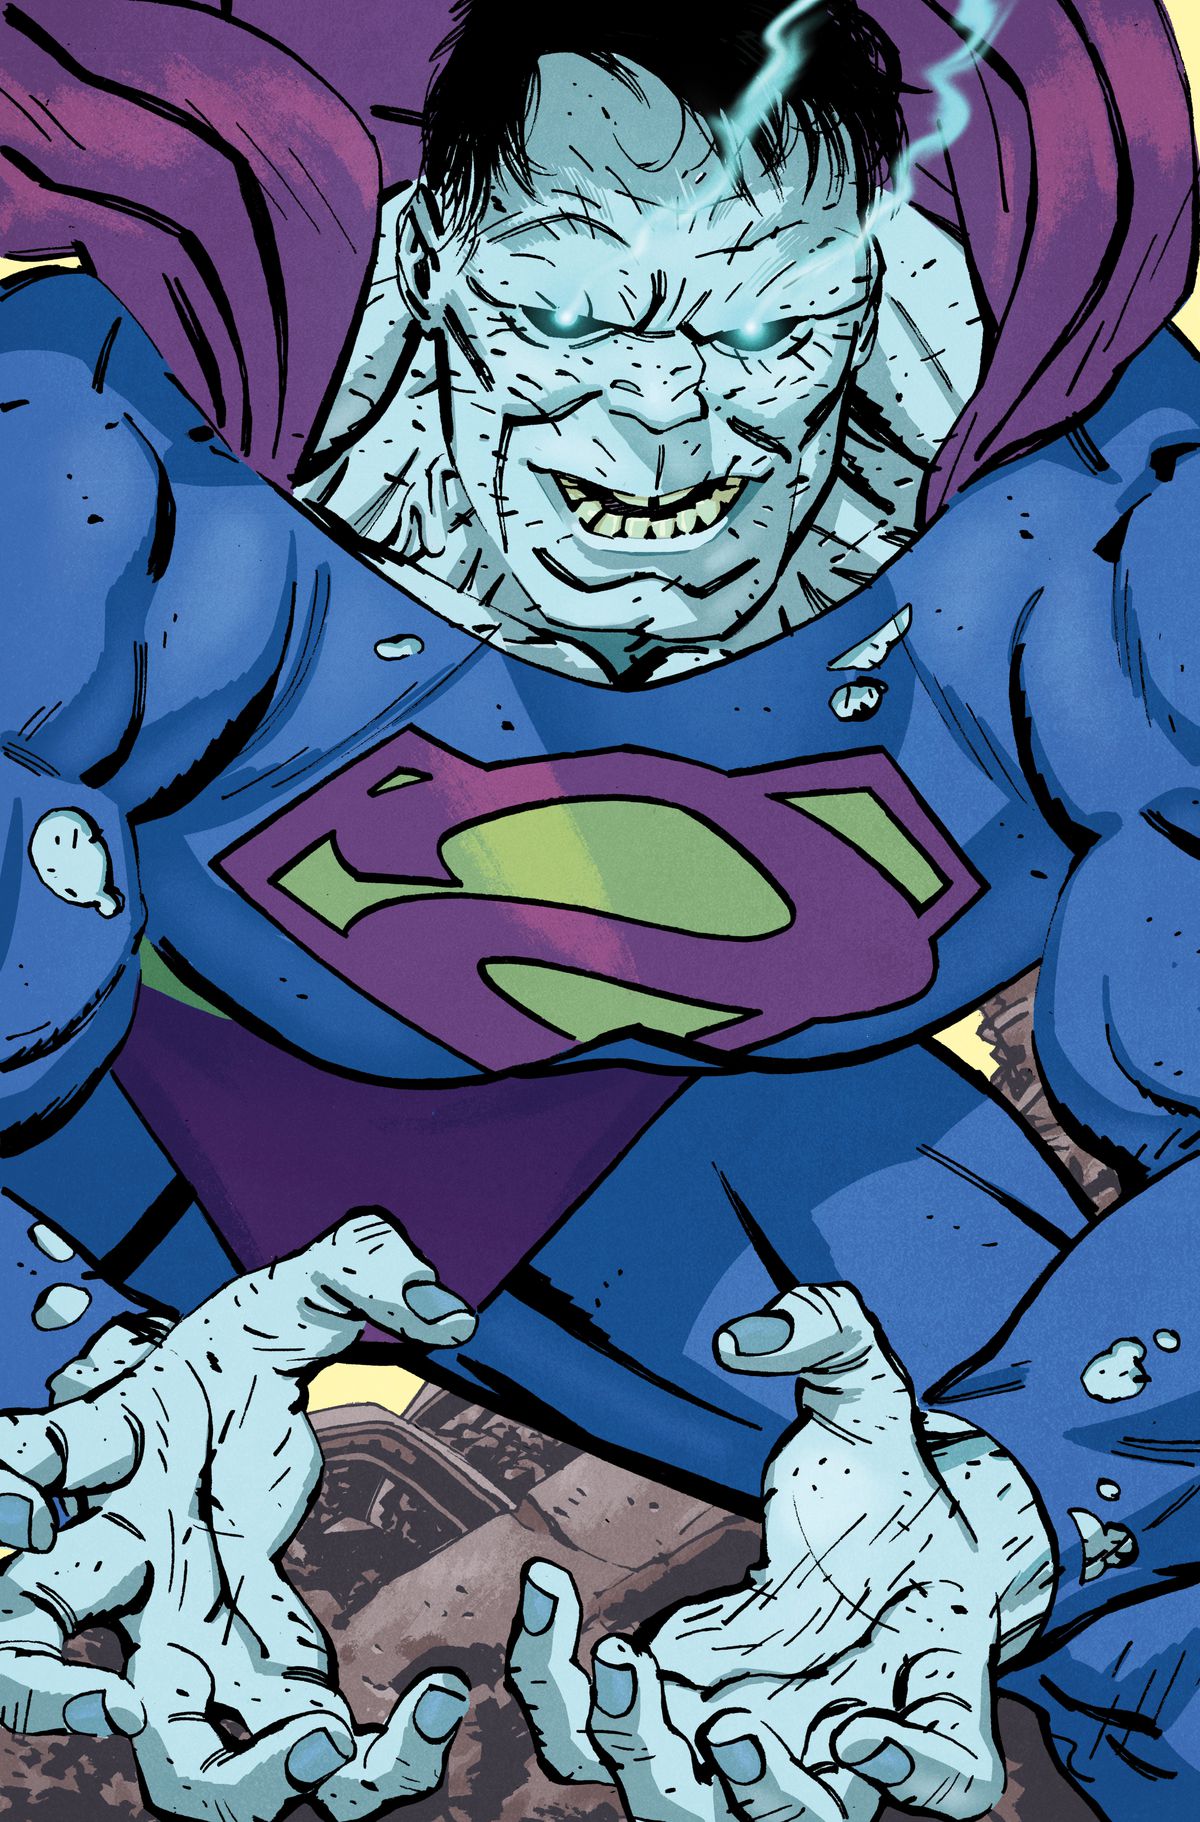 Bizarro crouches in rubble on a variant cover of Action Comics #1061